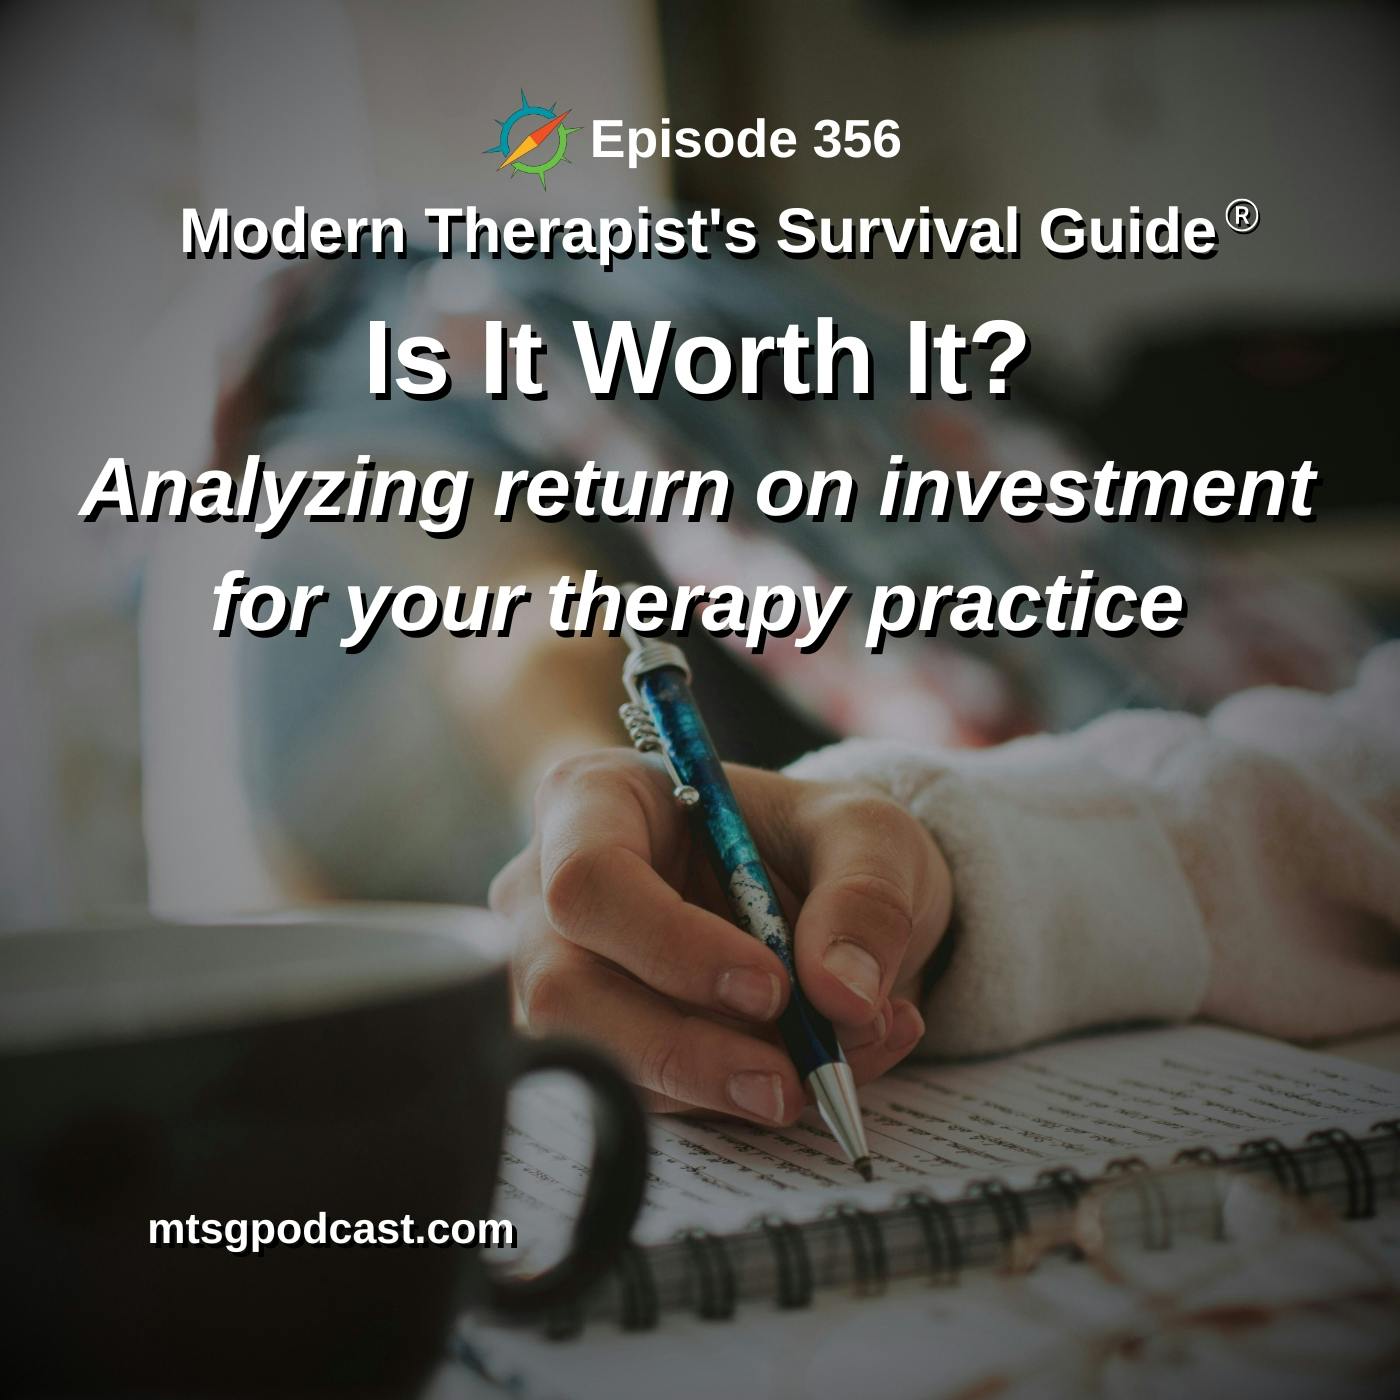 Is It Worth It? Analyzing return on investment for your therapy practice